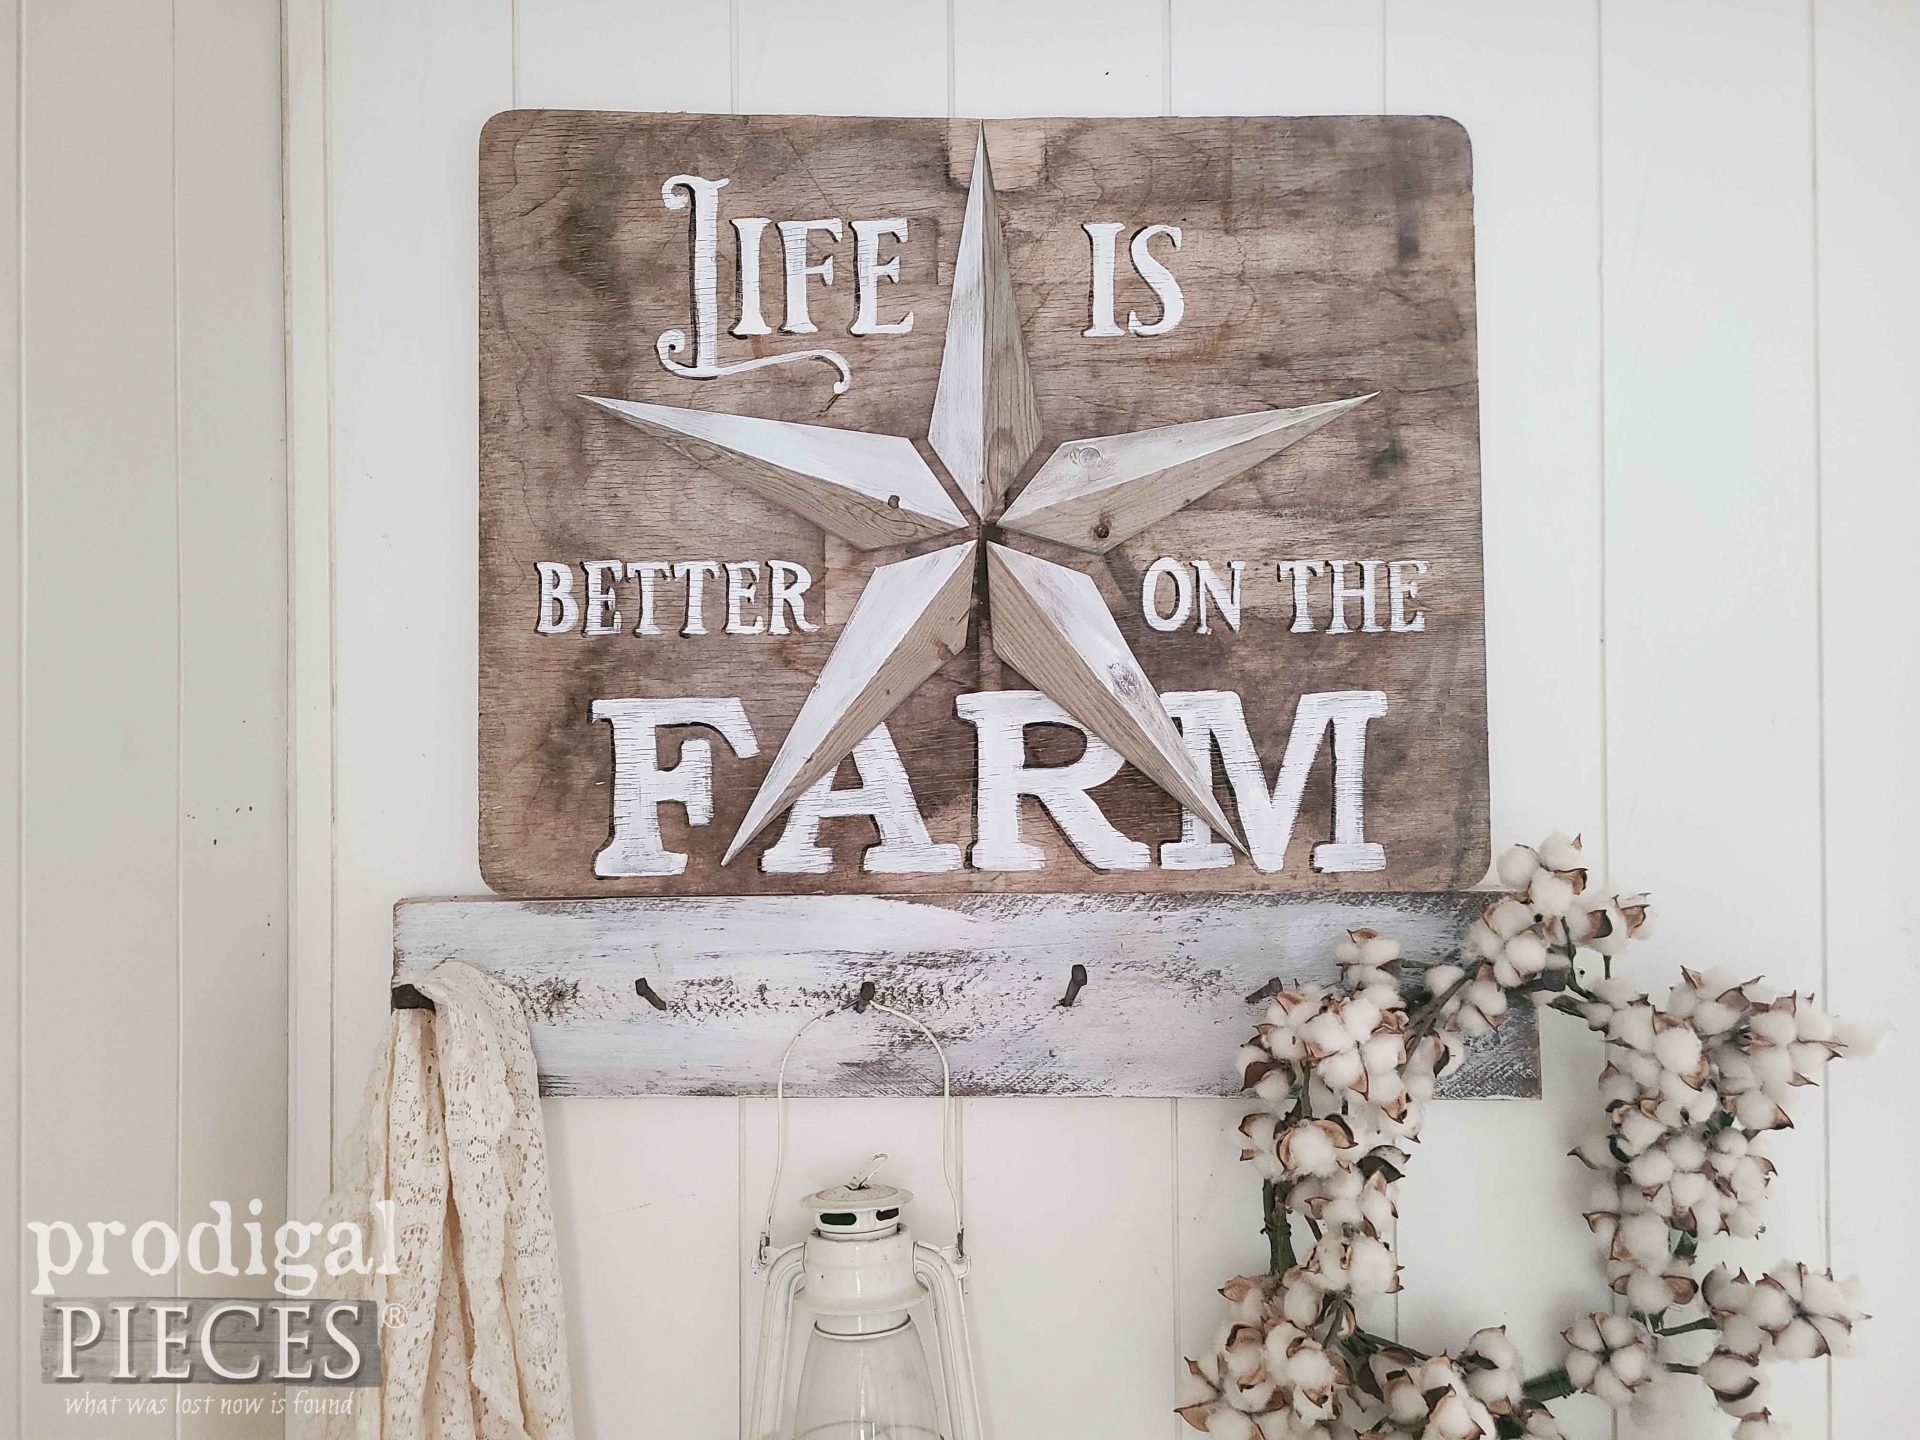 Rustic Chic Farmhouse Sign with Reclaimed Wood Star by Larissa of Prodigal Pieces | prodigalpieces.com #prodigalpieces #rustic #art #farmhouse